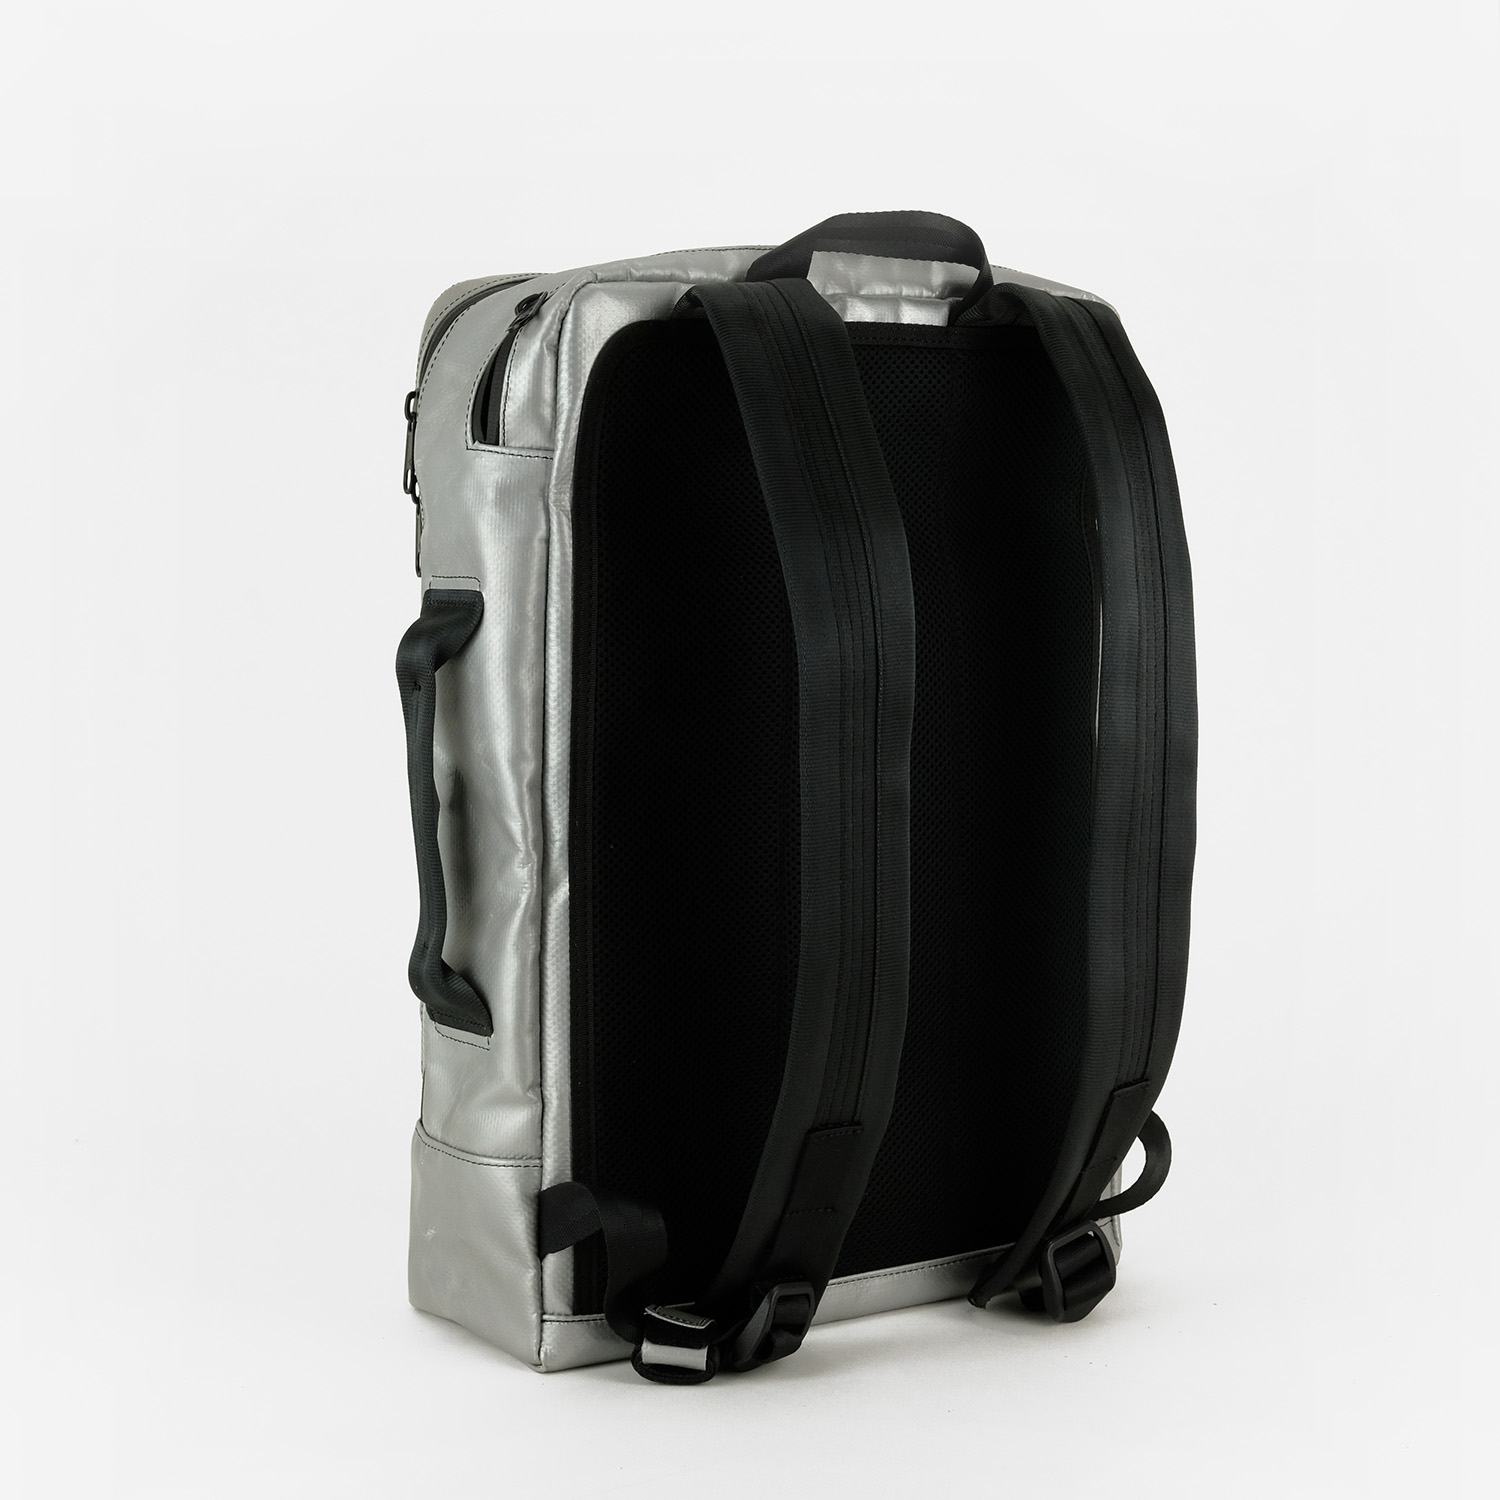 FREITAG :: HAZZARD F303 :: F303 Hazzard is the smartest and most ...